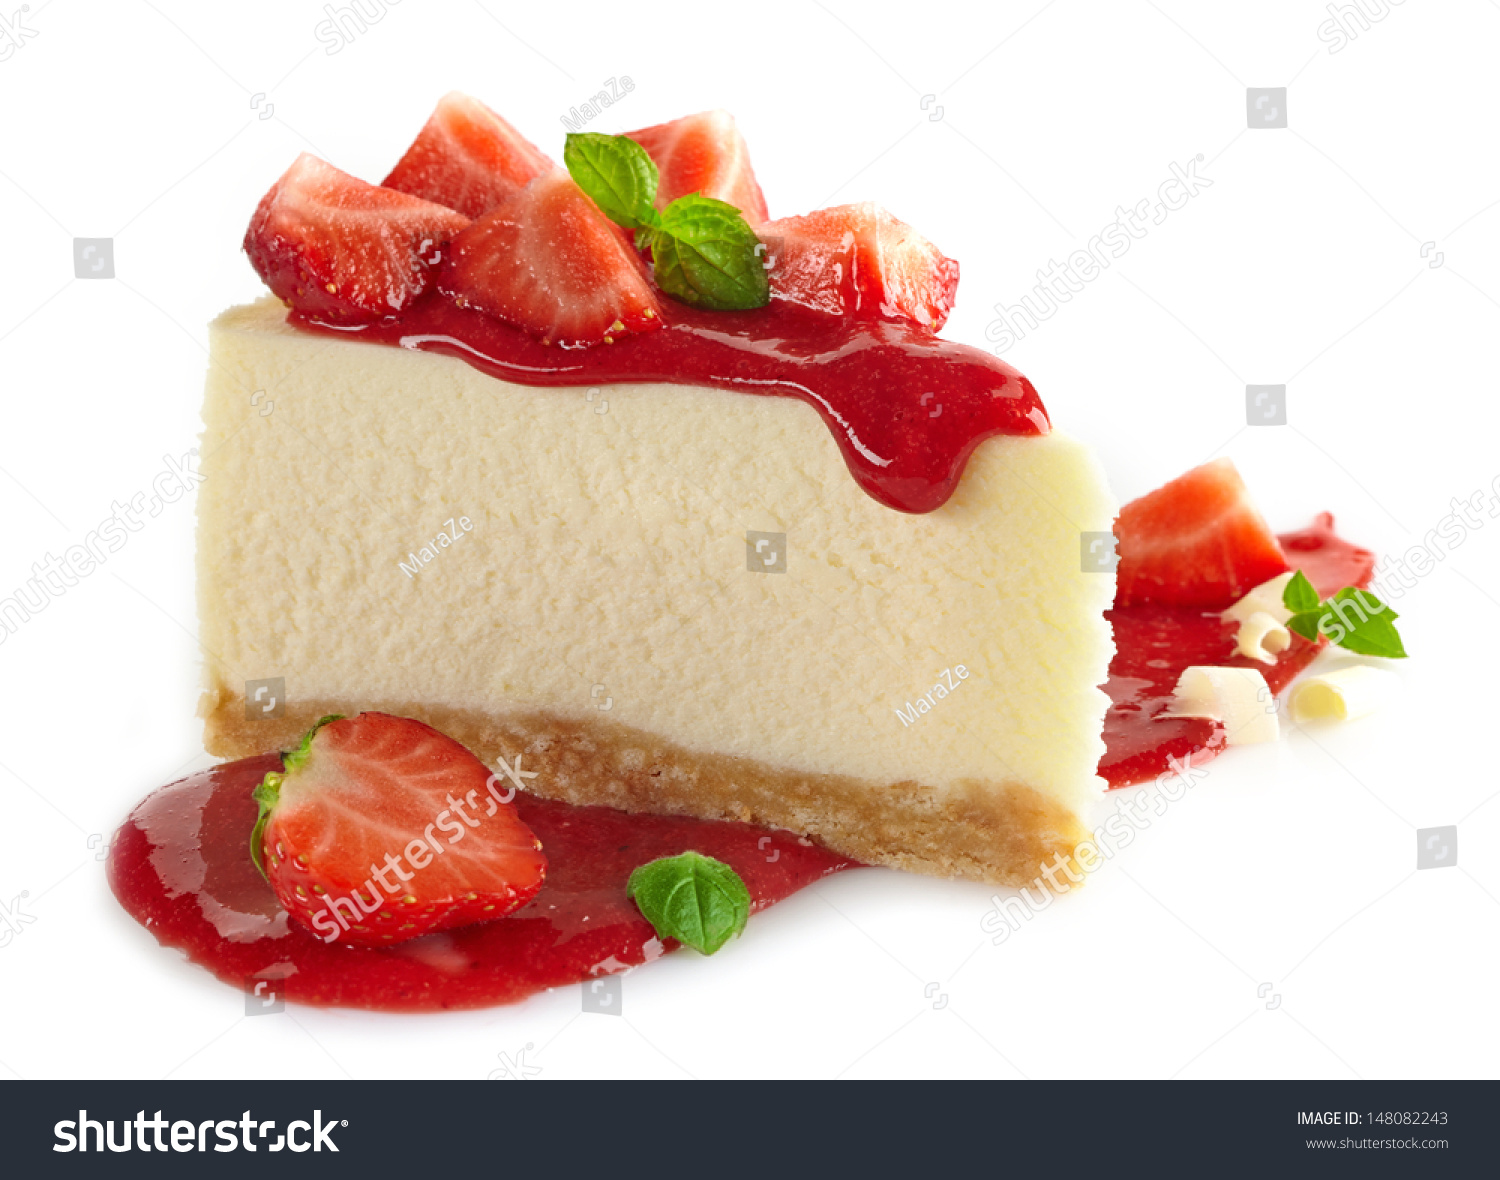 strawberry cheesecake and fresh berries isolated on white background #148082243